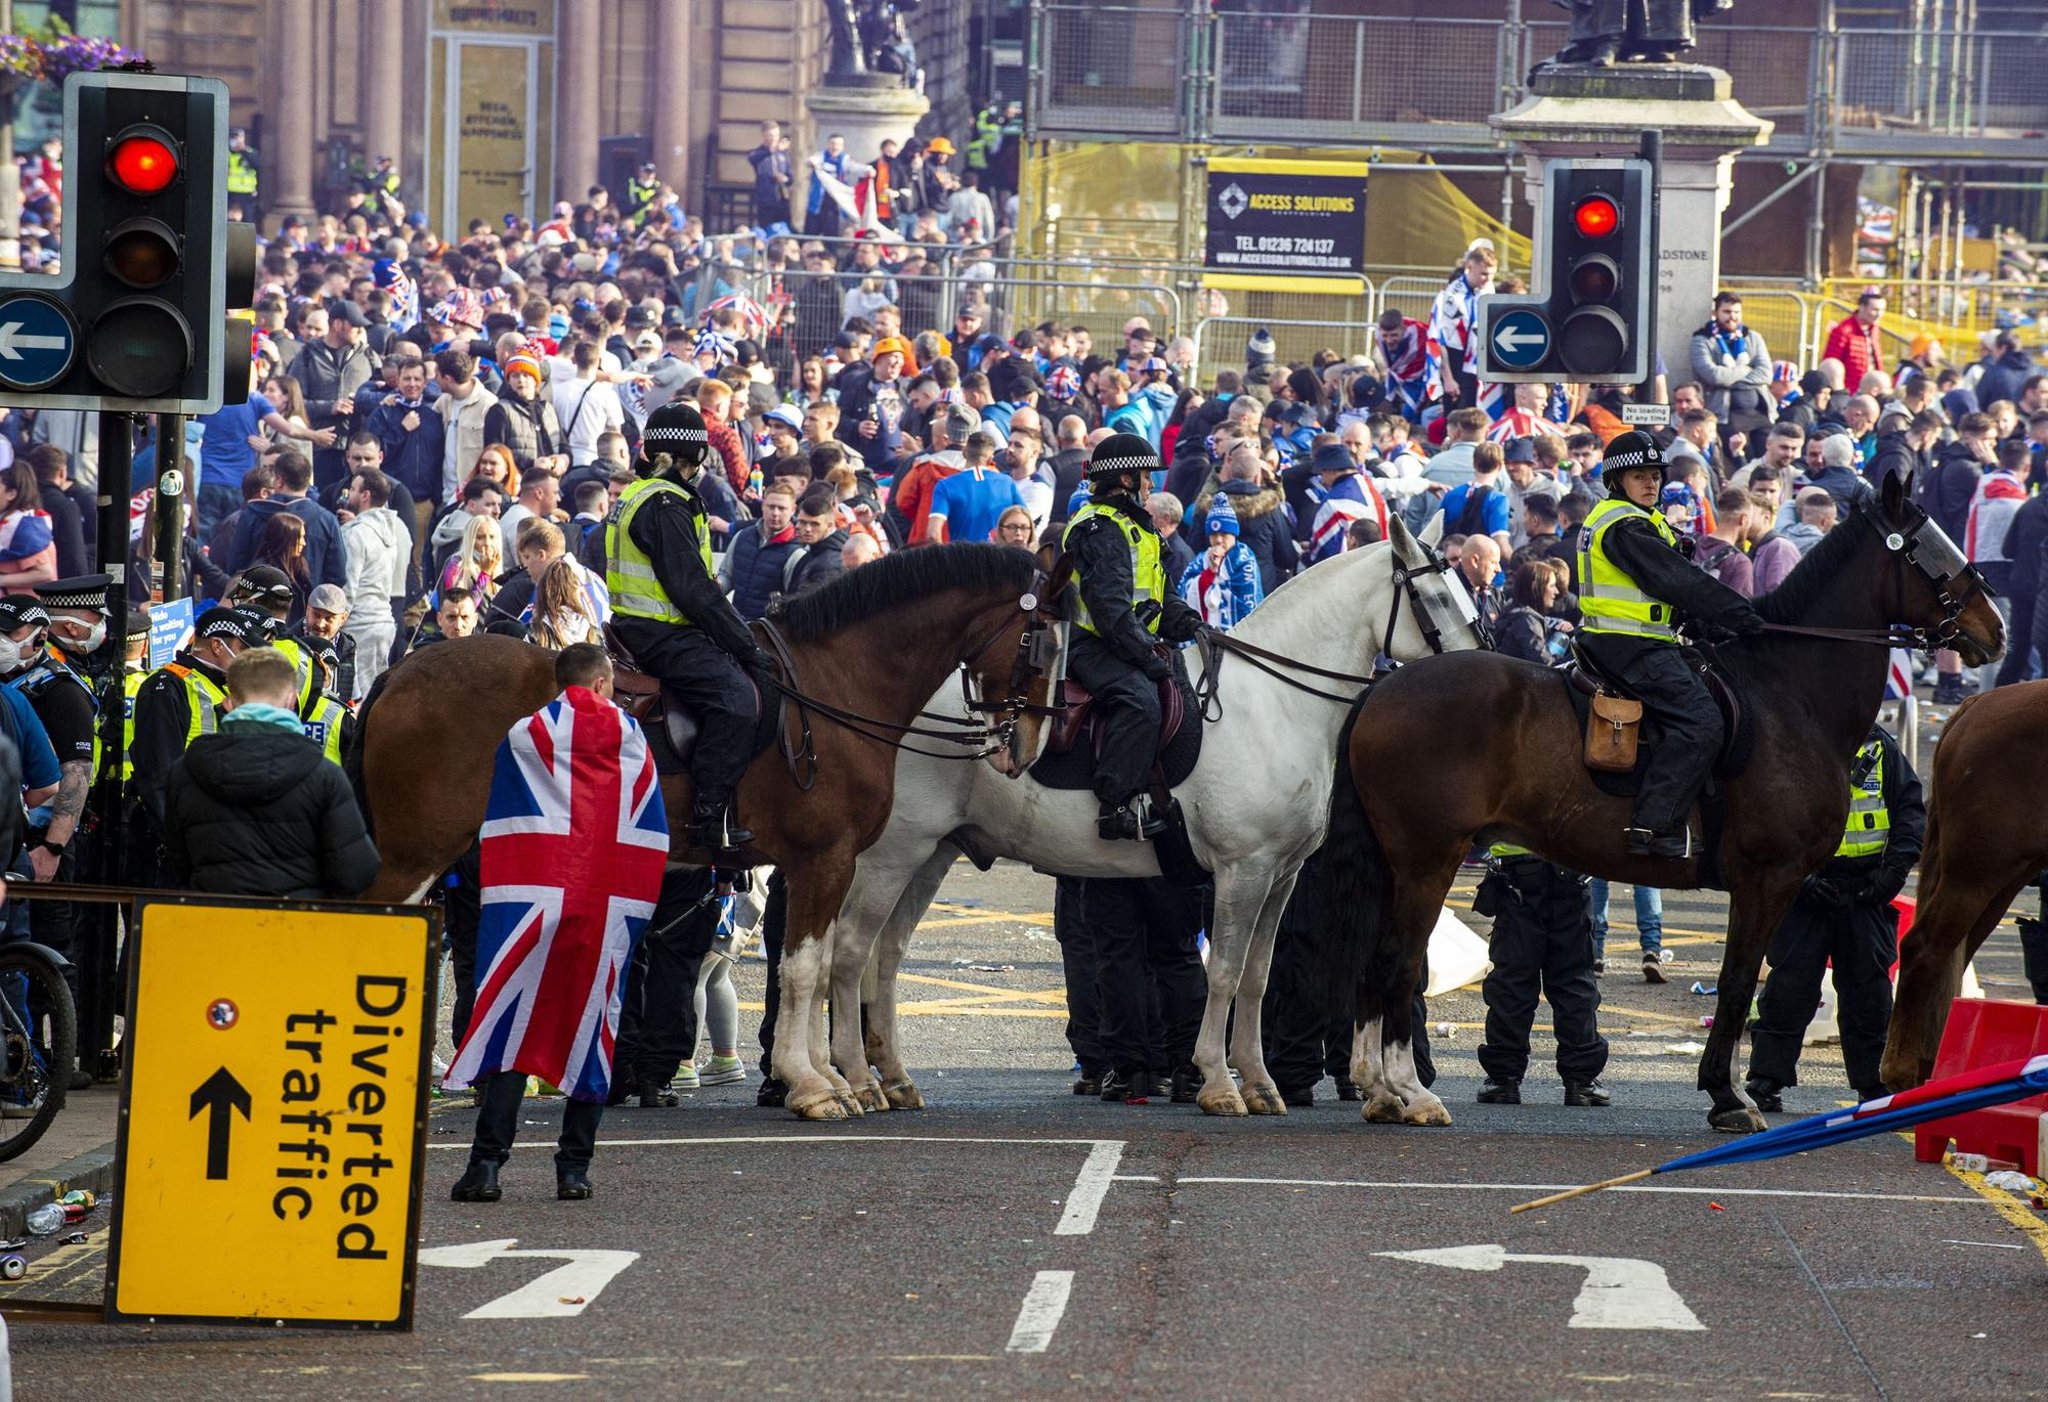 George Square: Five officers injured following violent scenes involving Rangers fans in Glasgow